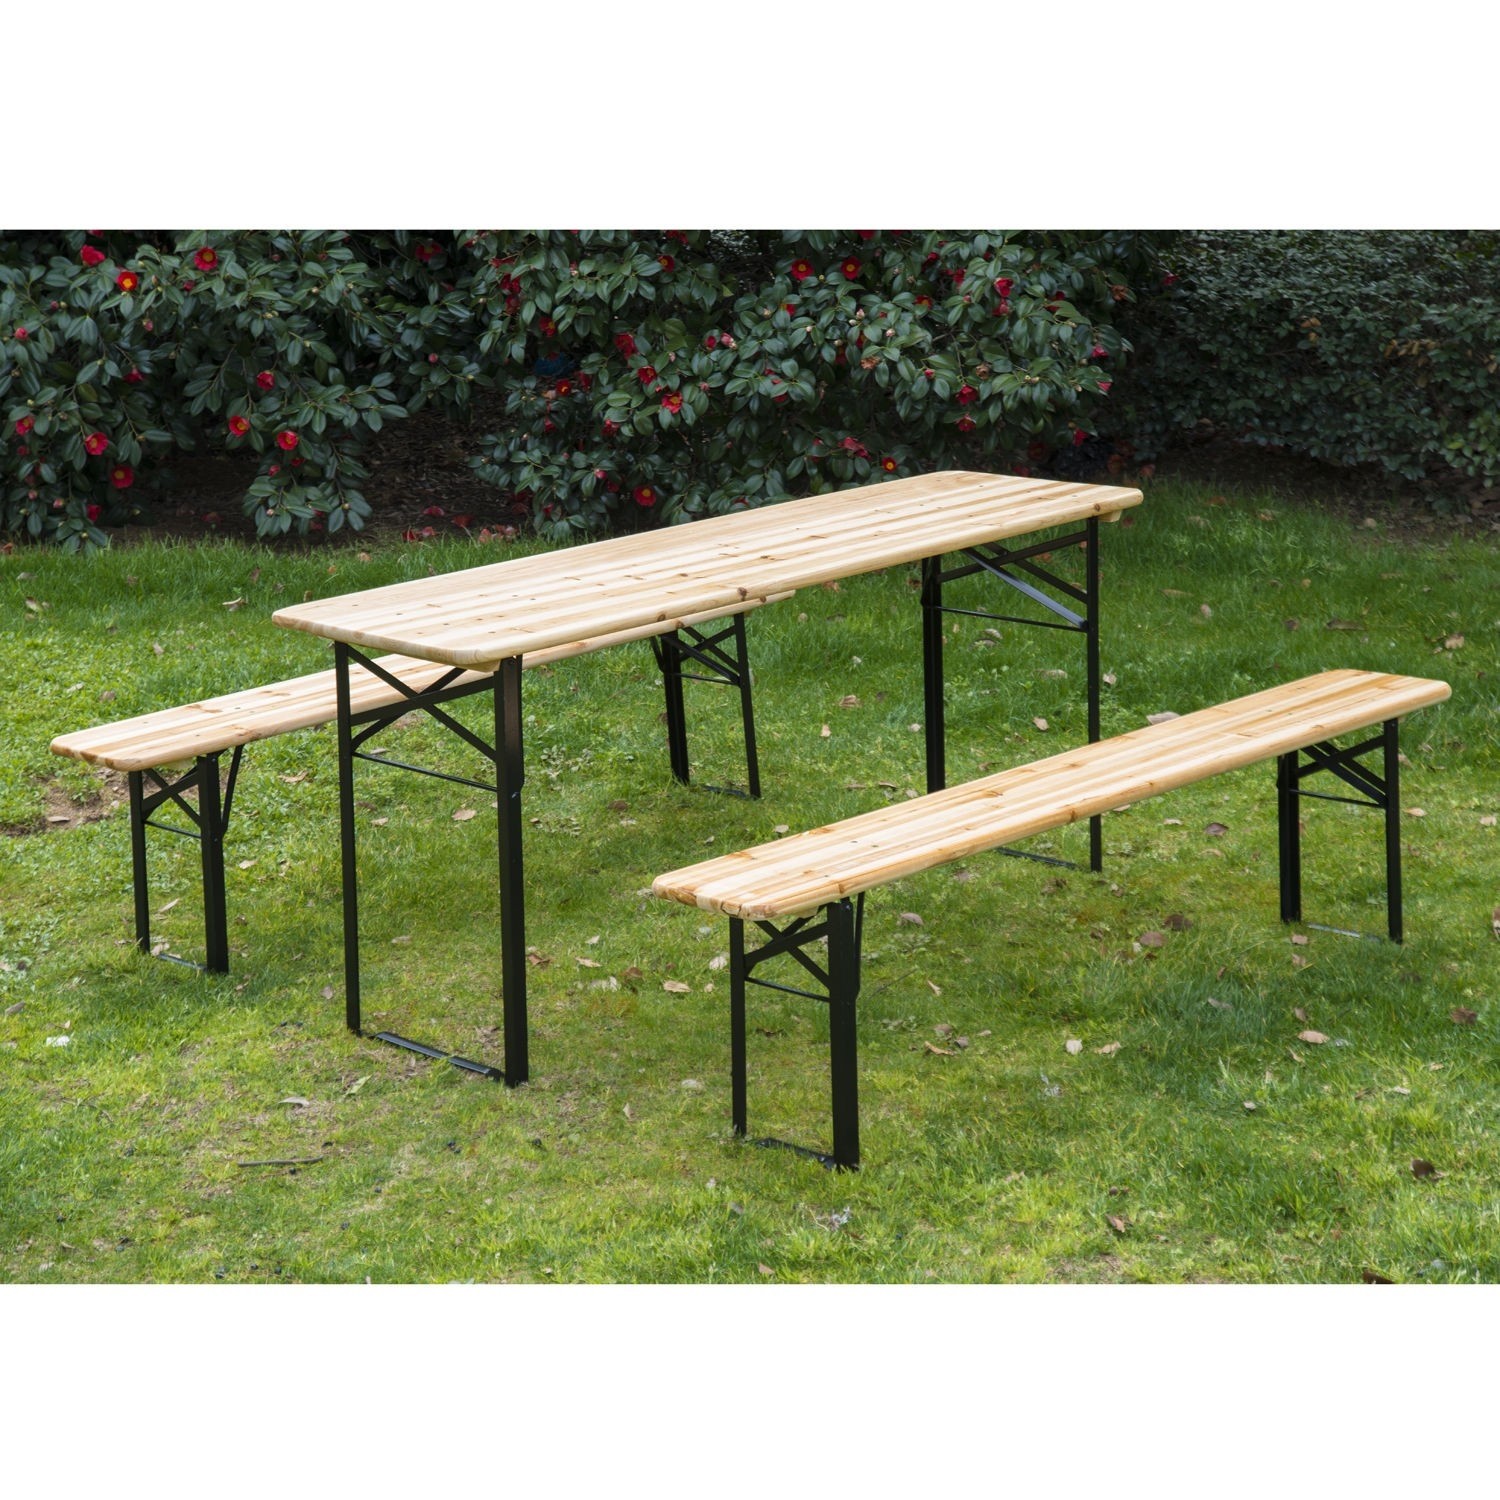 Outsunny 6 wooden outdoor folding picnic table set